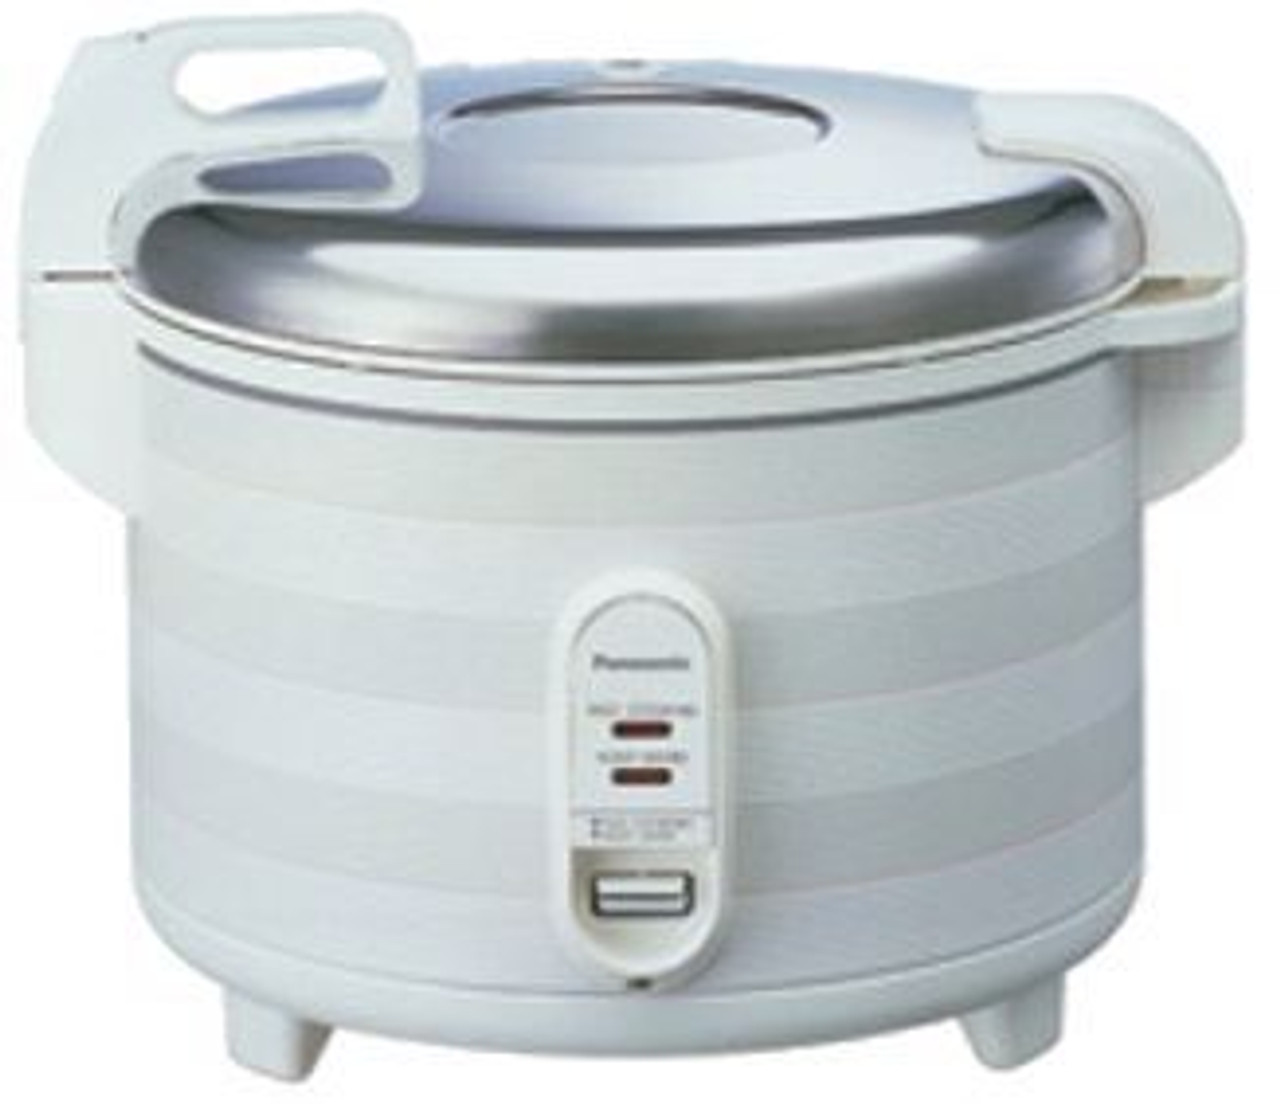 Proctor Silex 37540 40 Cup (20 Cup Raw) Rice Cooker / Warmer